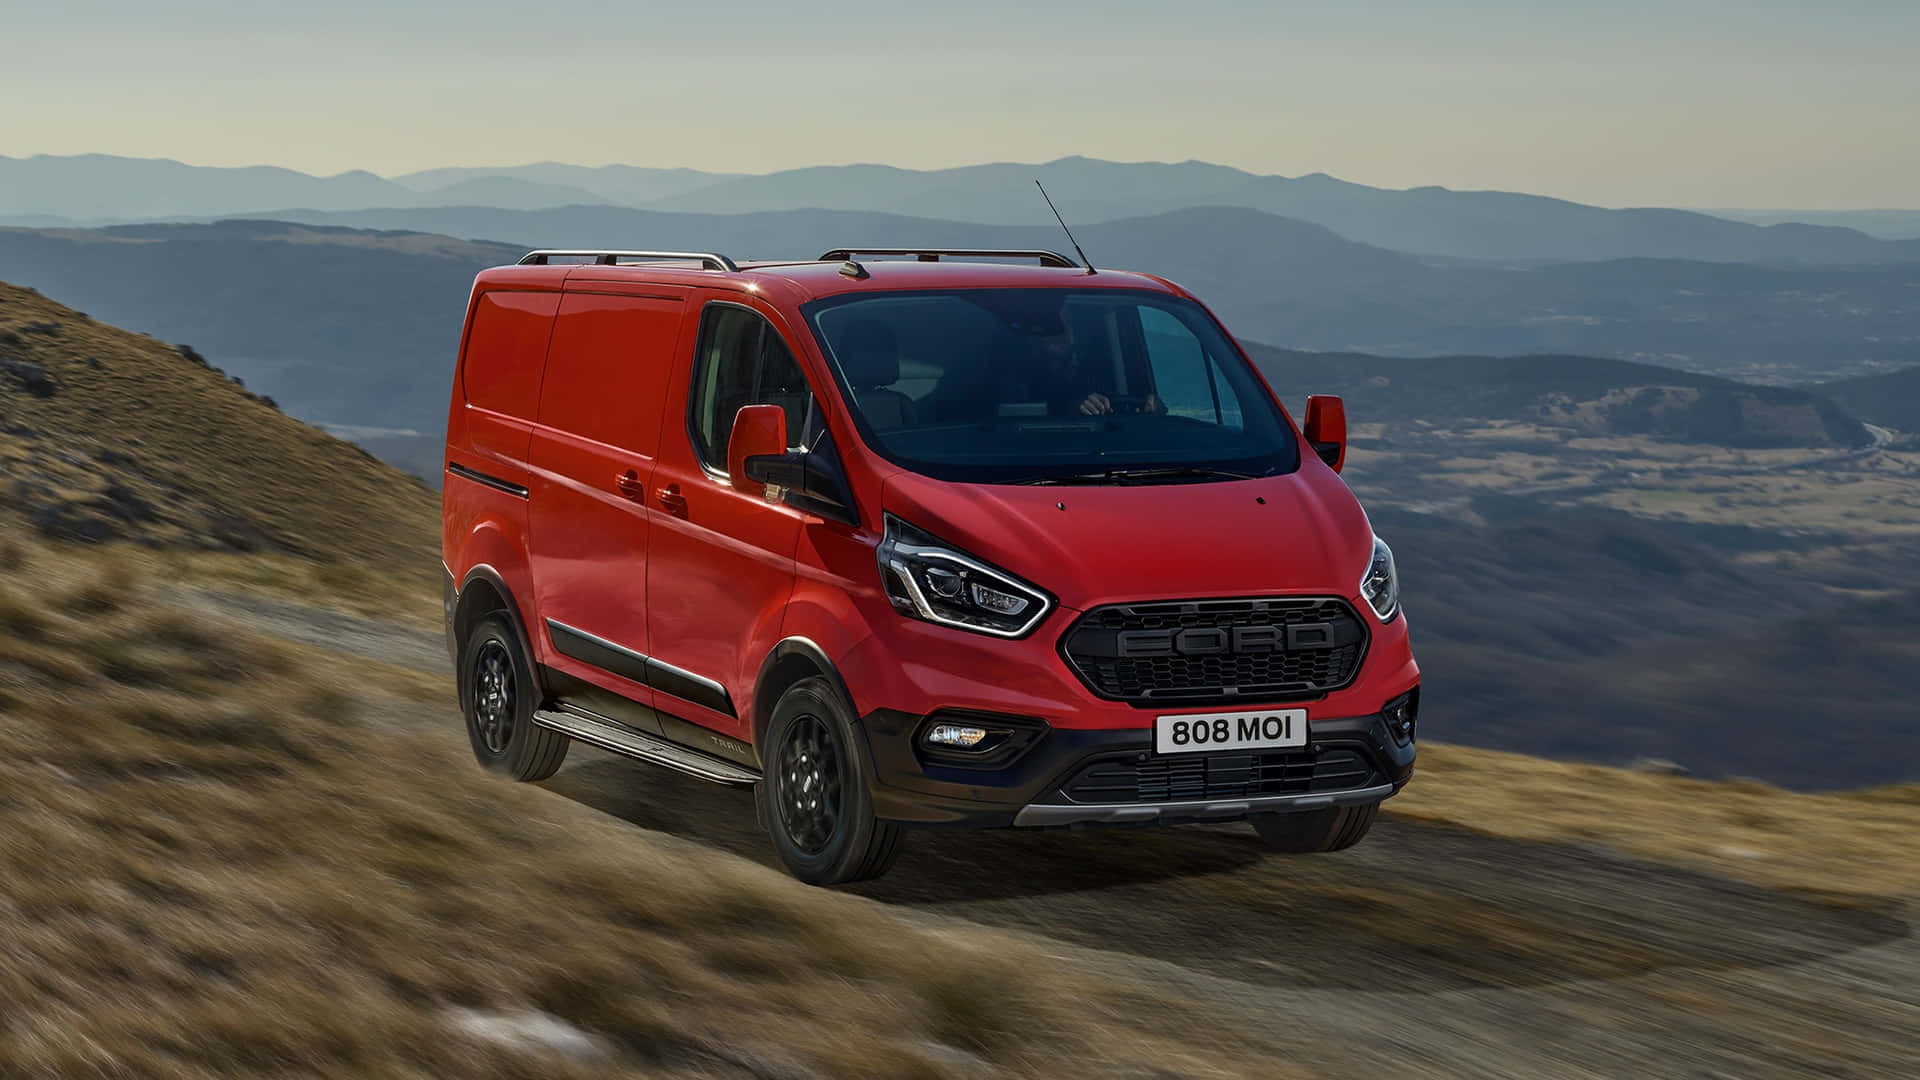 Sleek and Stylish Ford Transit on the Road Wallpaper